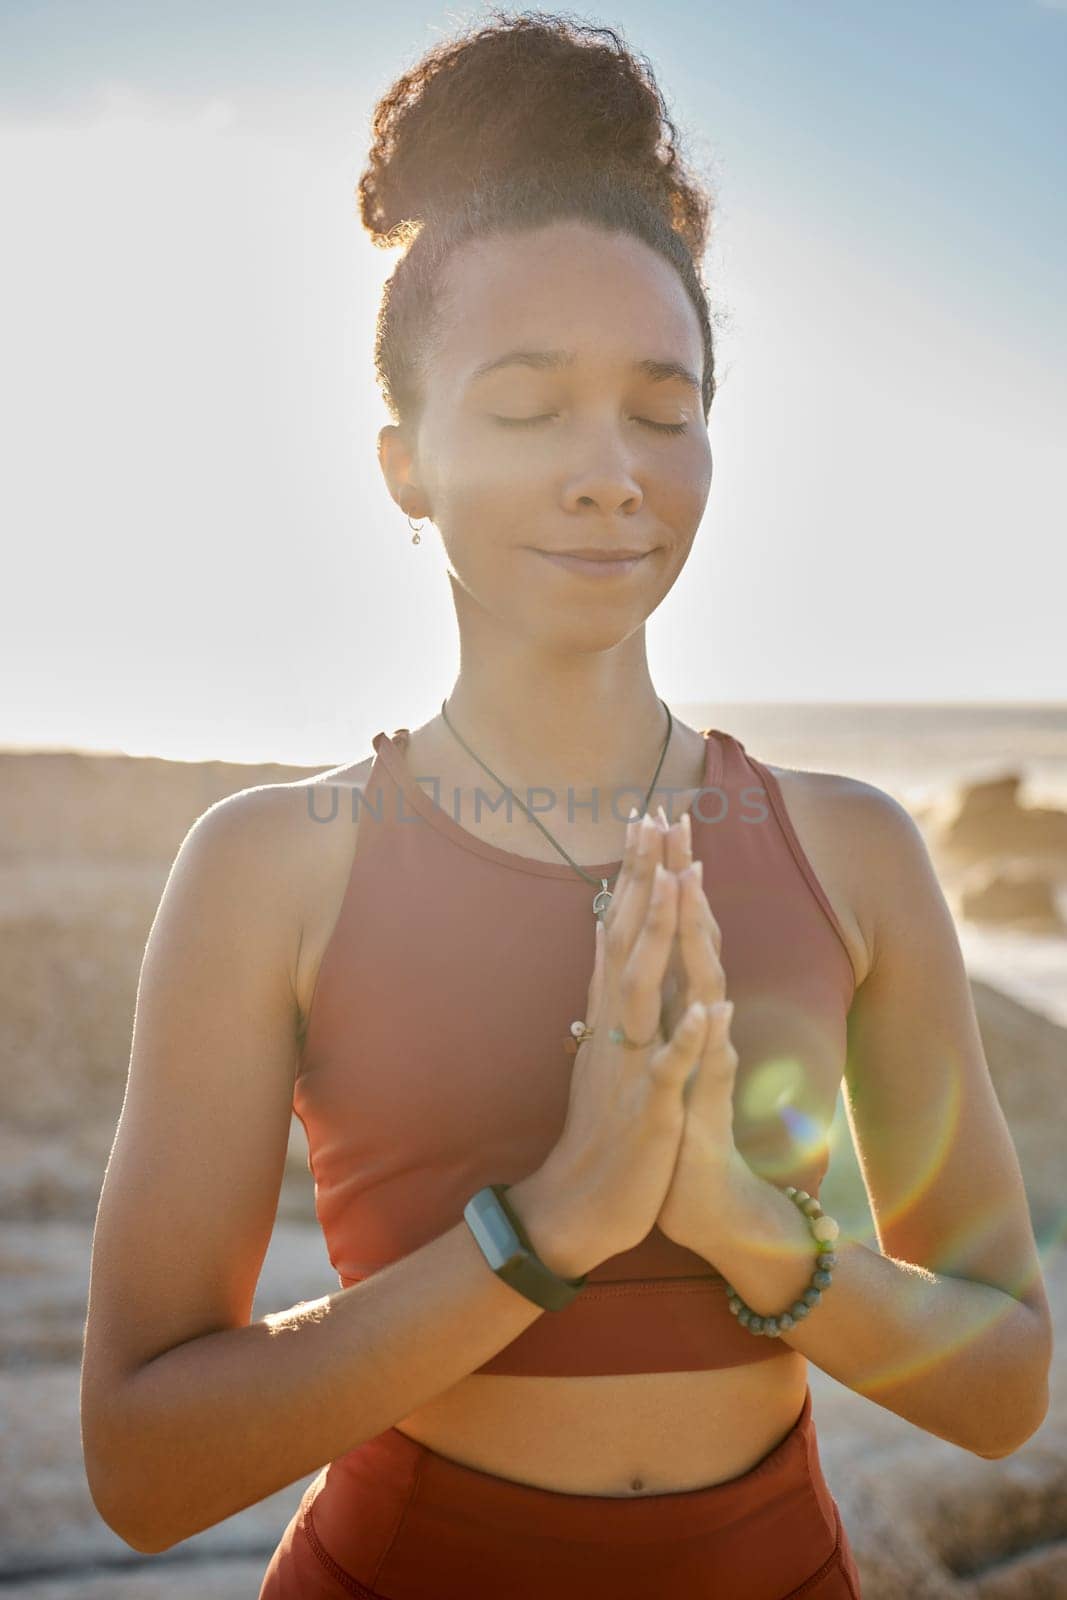 Meditation, calm and woman doing exercise at the beach for wellness, peace and relaxation. Nature, fitness and black woman with hands together doing workout for zen, mental health and energy by ocean.